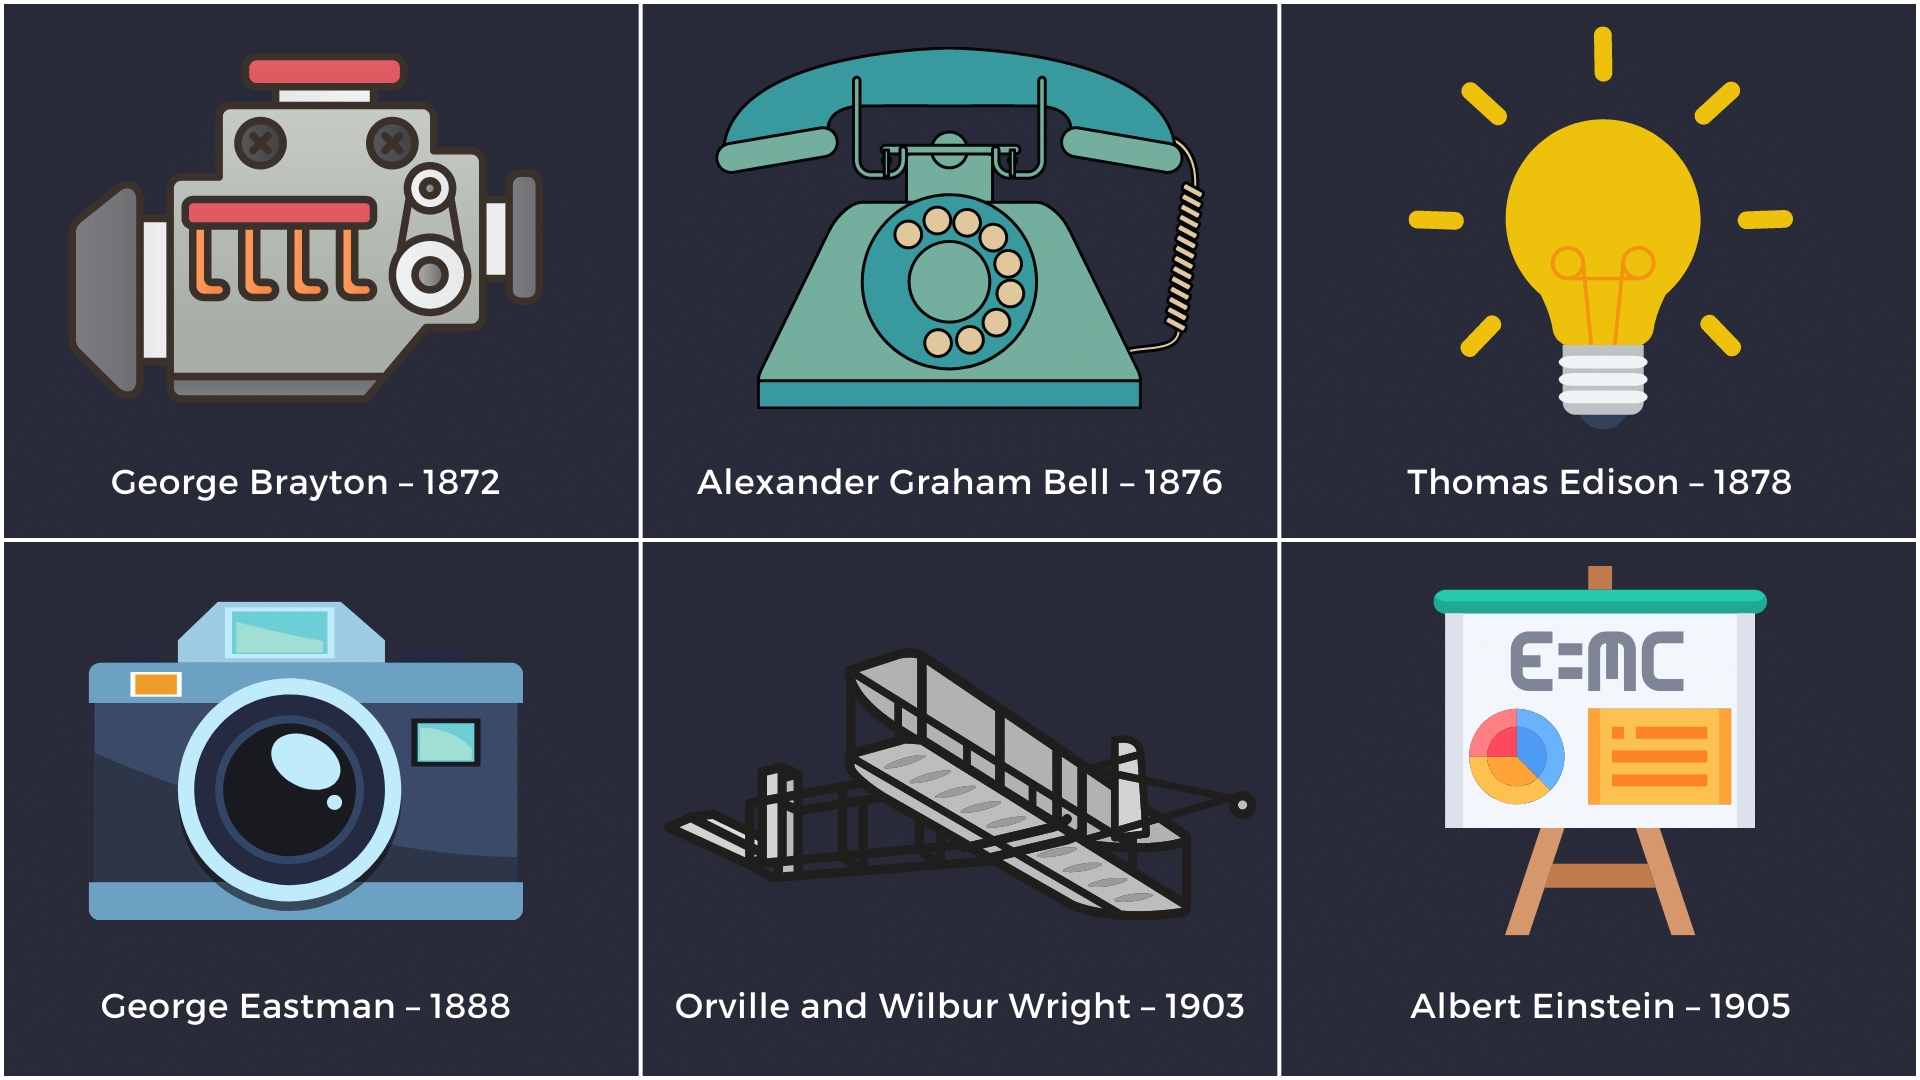 Inventions during the late 19th and early 20th centuries under the gold standard